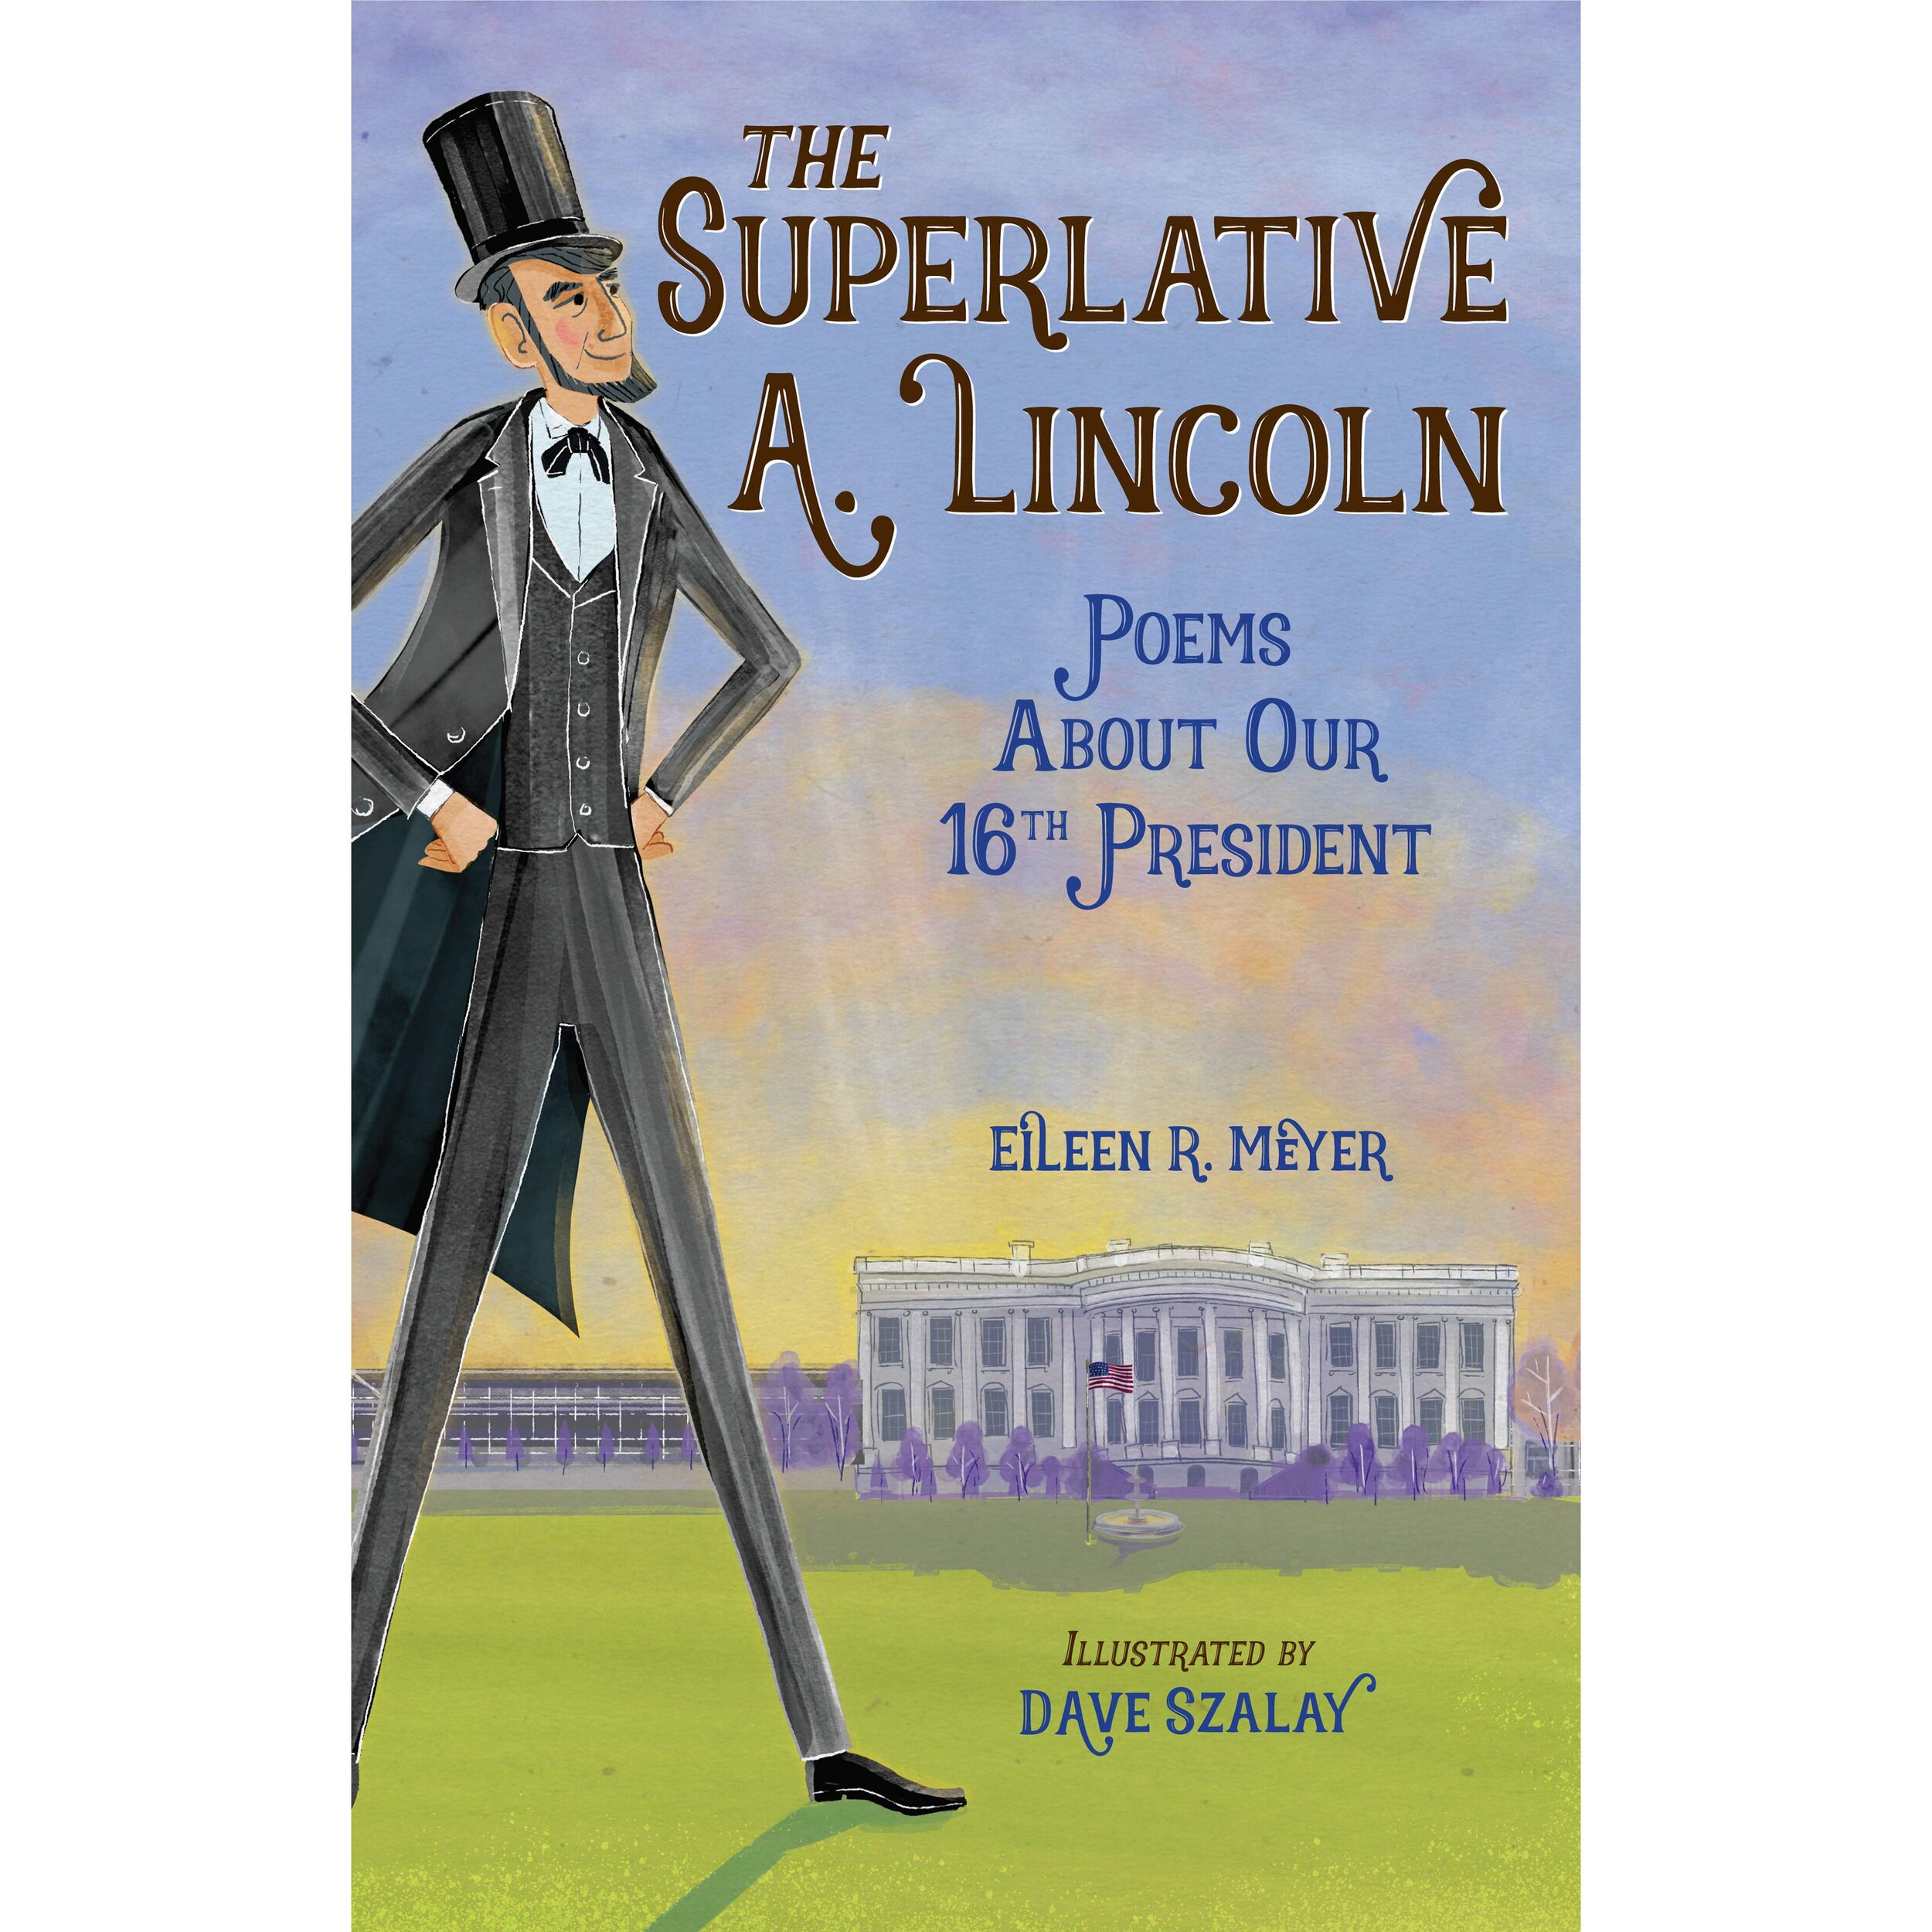 The Superlative A. Lincoln, Poems about our 16th president (Meyer and Szalay)